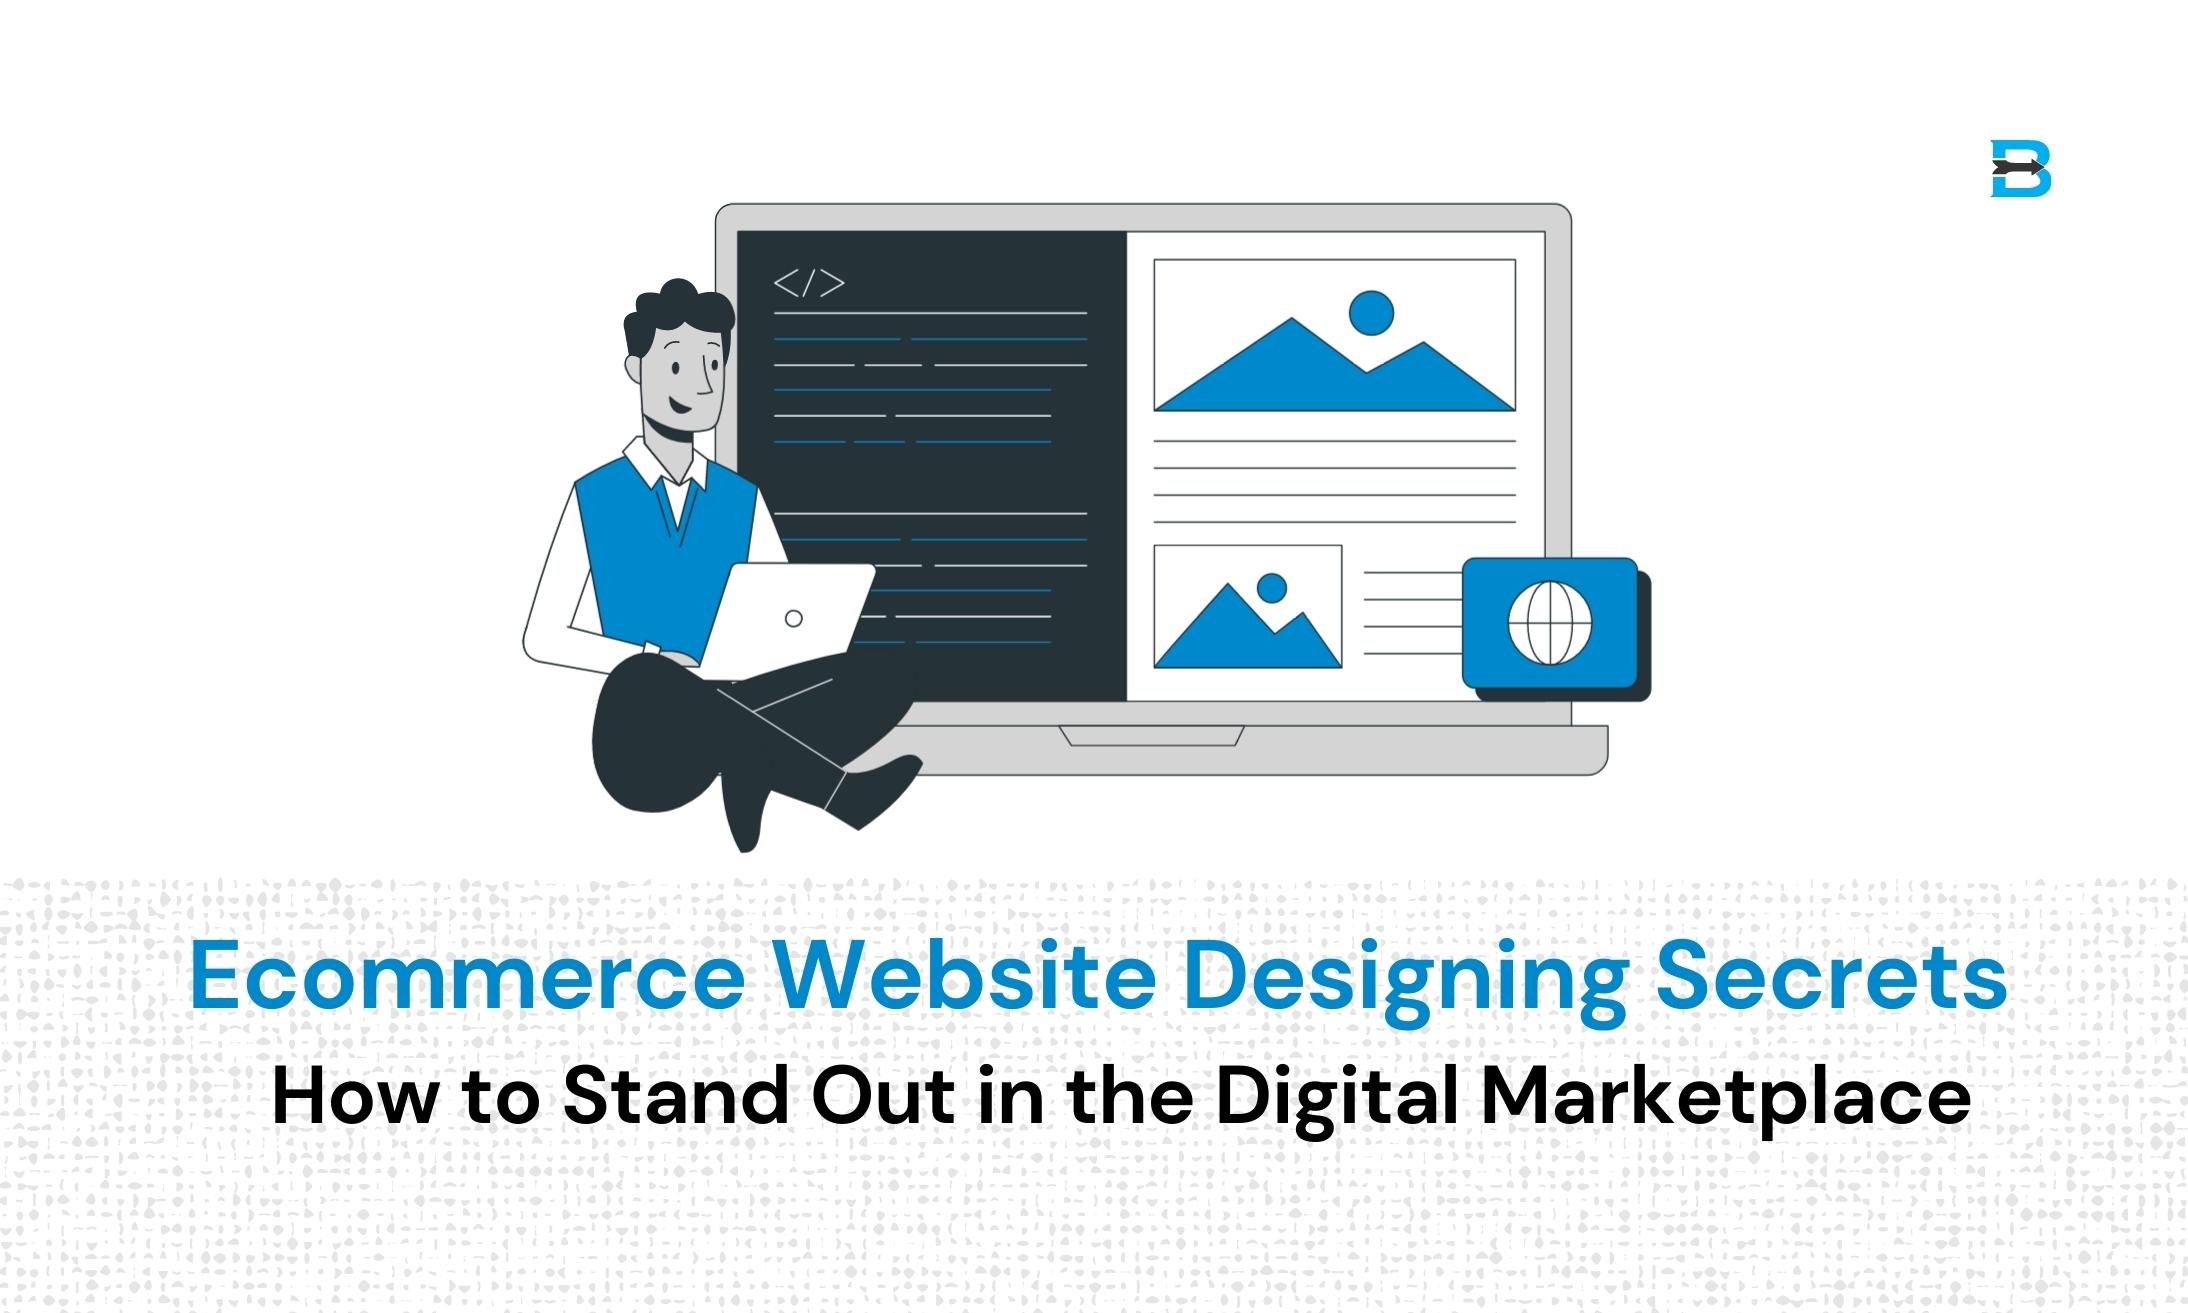 Ecommerce Website Designing Secrets How to Stand Out in the Digital Marketplace